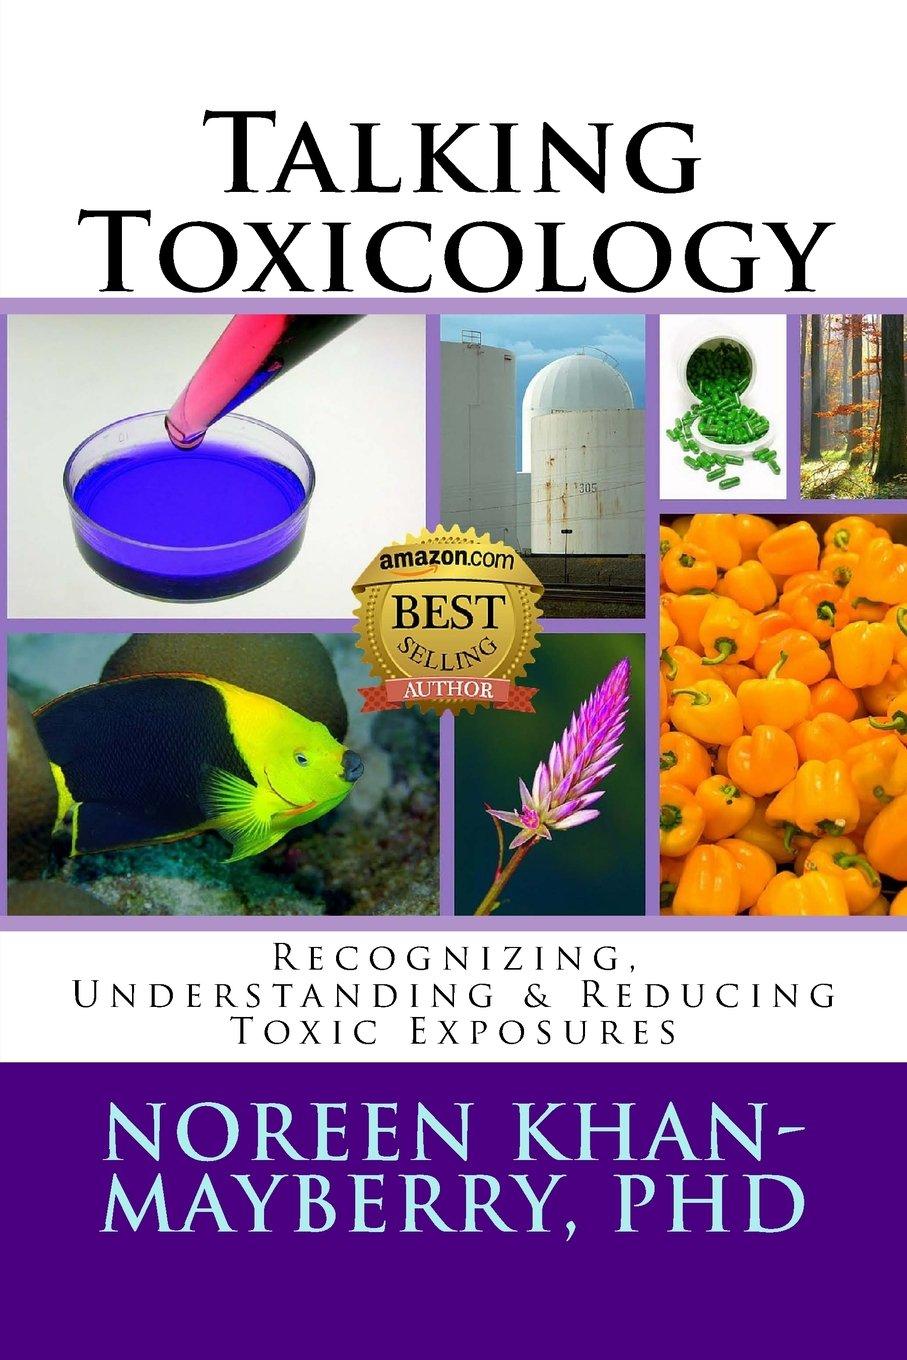 talking toxicology 1st edition dr noreen khan-mayberry 0984950303, 978-0984950300